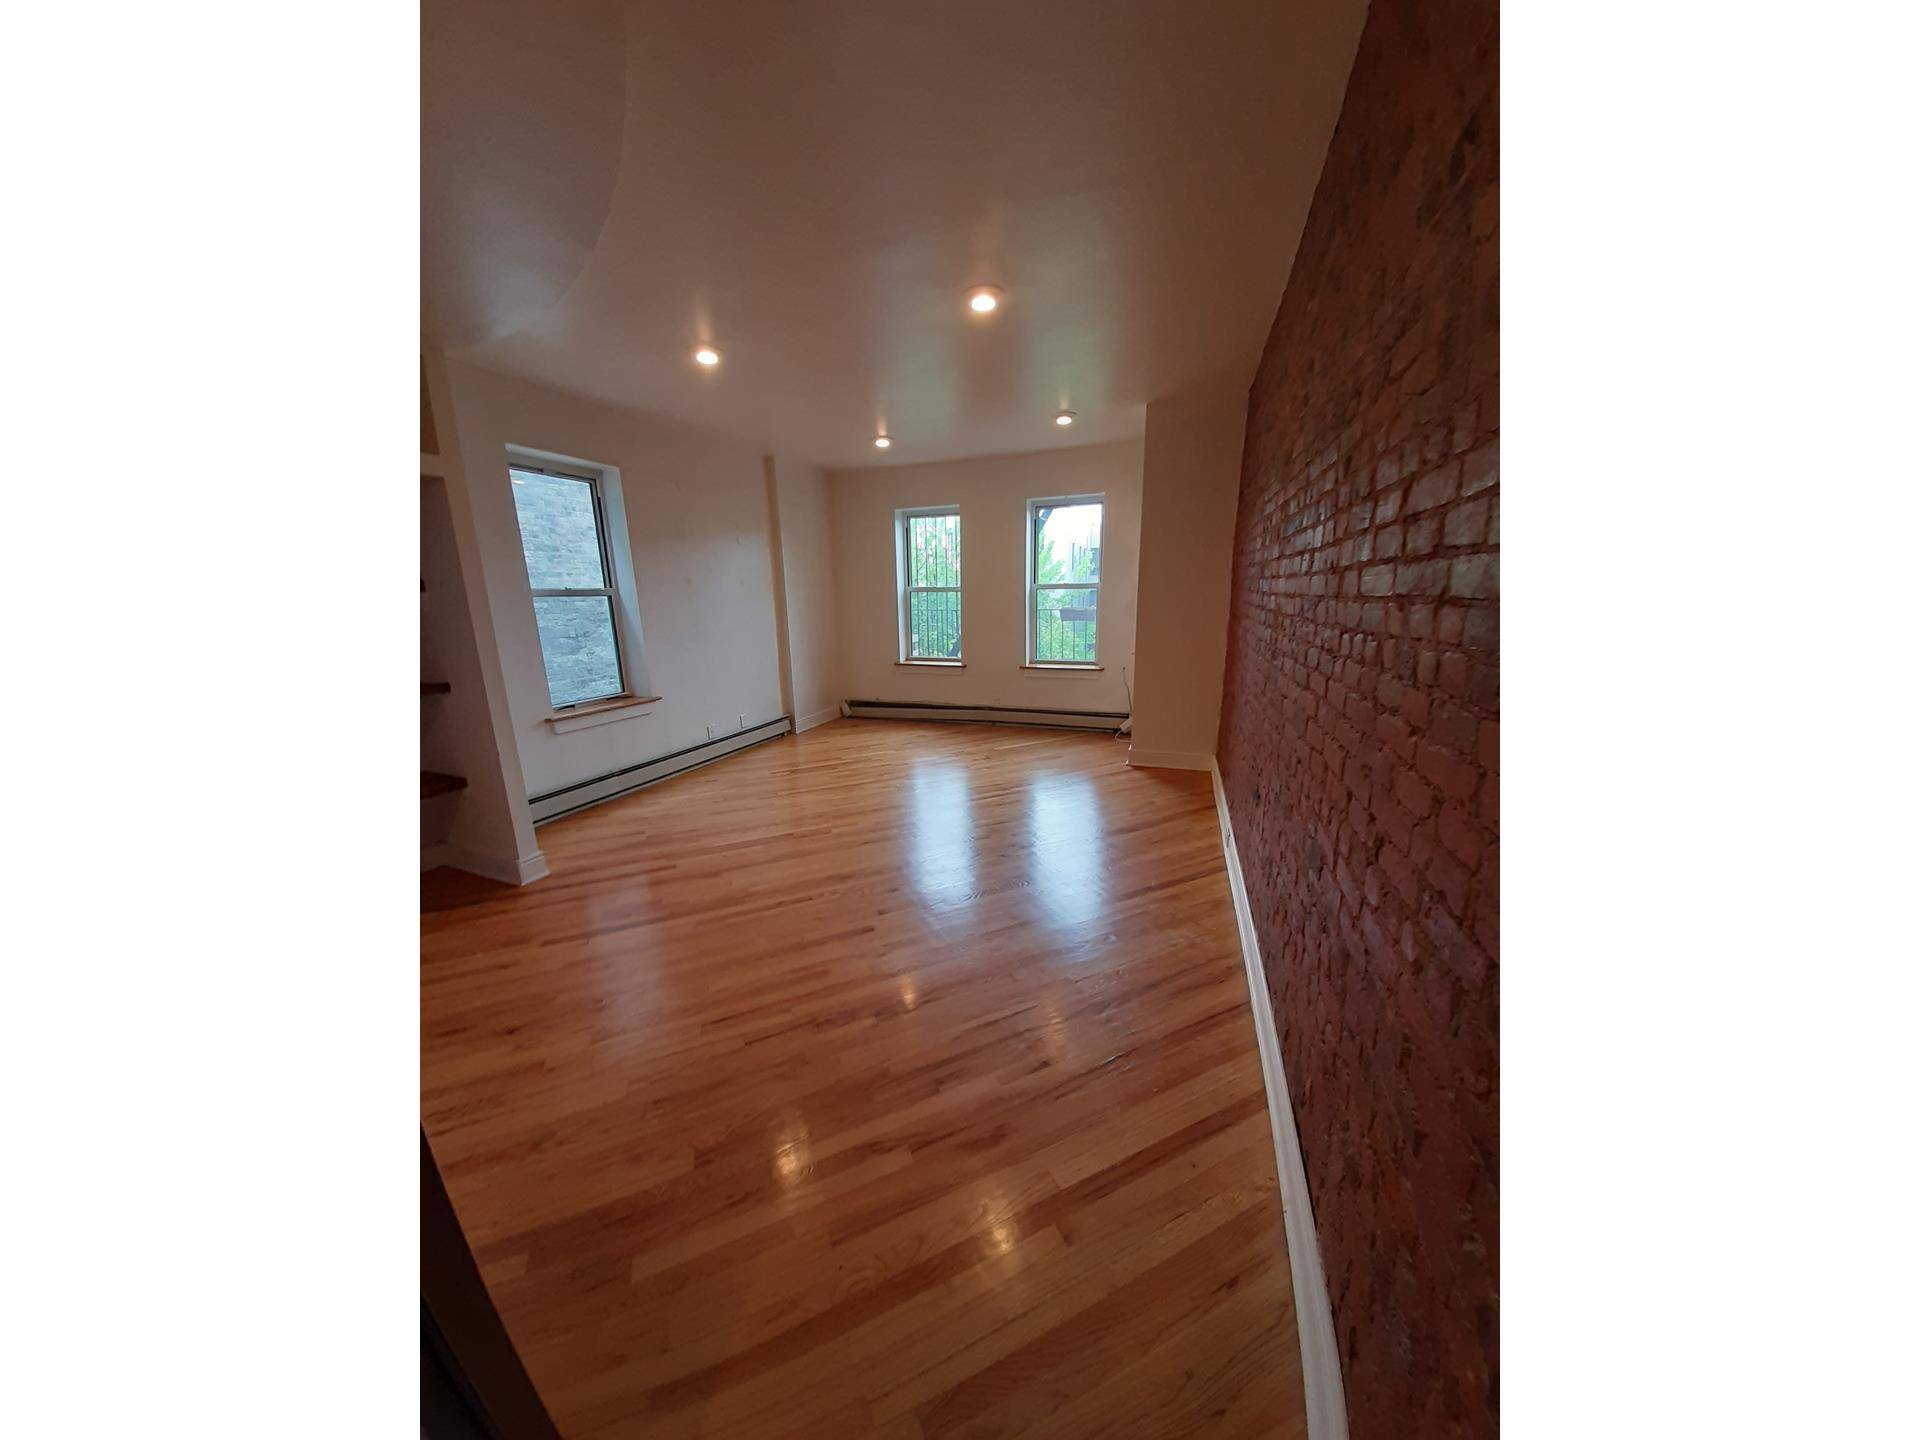 Rent stabilized 1 bedroom apartment located on the Prospect Heights Crown Heights border a half block from the subway and near the Brooklyn Museum, Prospect Park, Grand Army Plaza, the ...